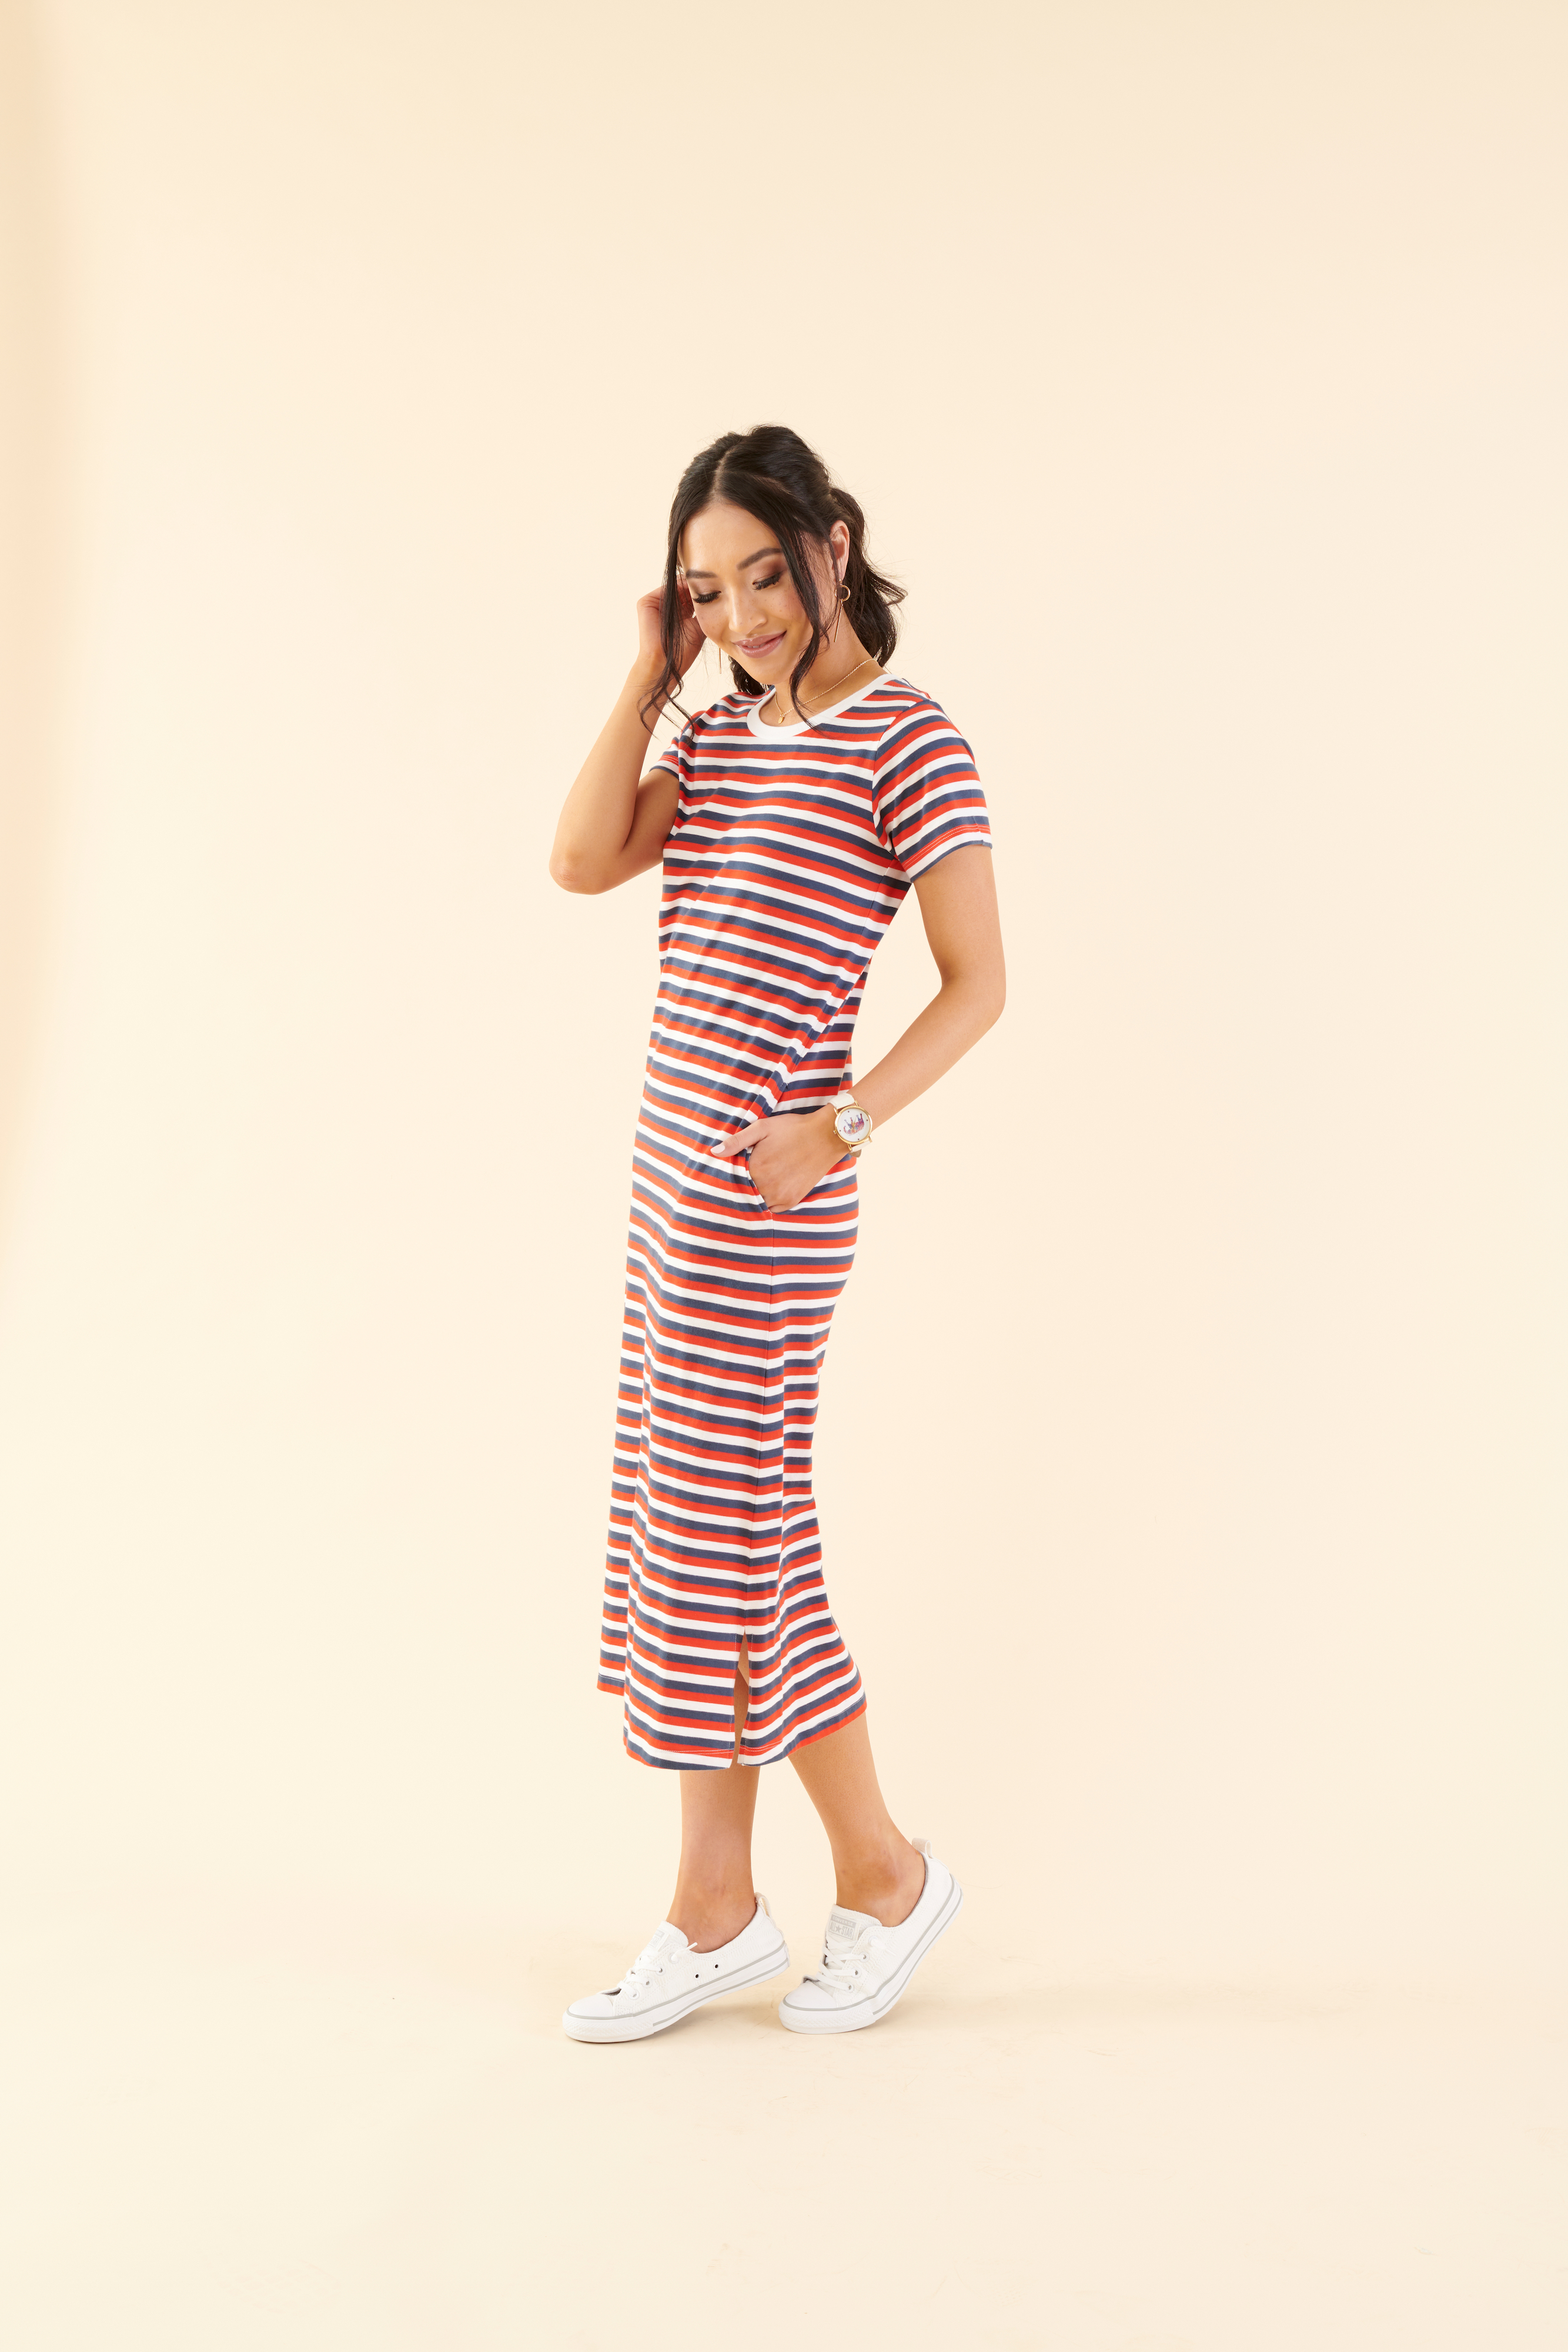 Pioneer dress  Pioneer dress, Pioneer clothing, Modest outfits